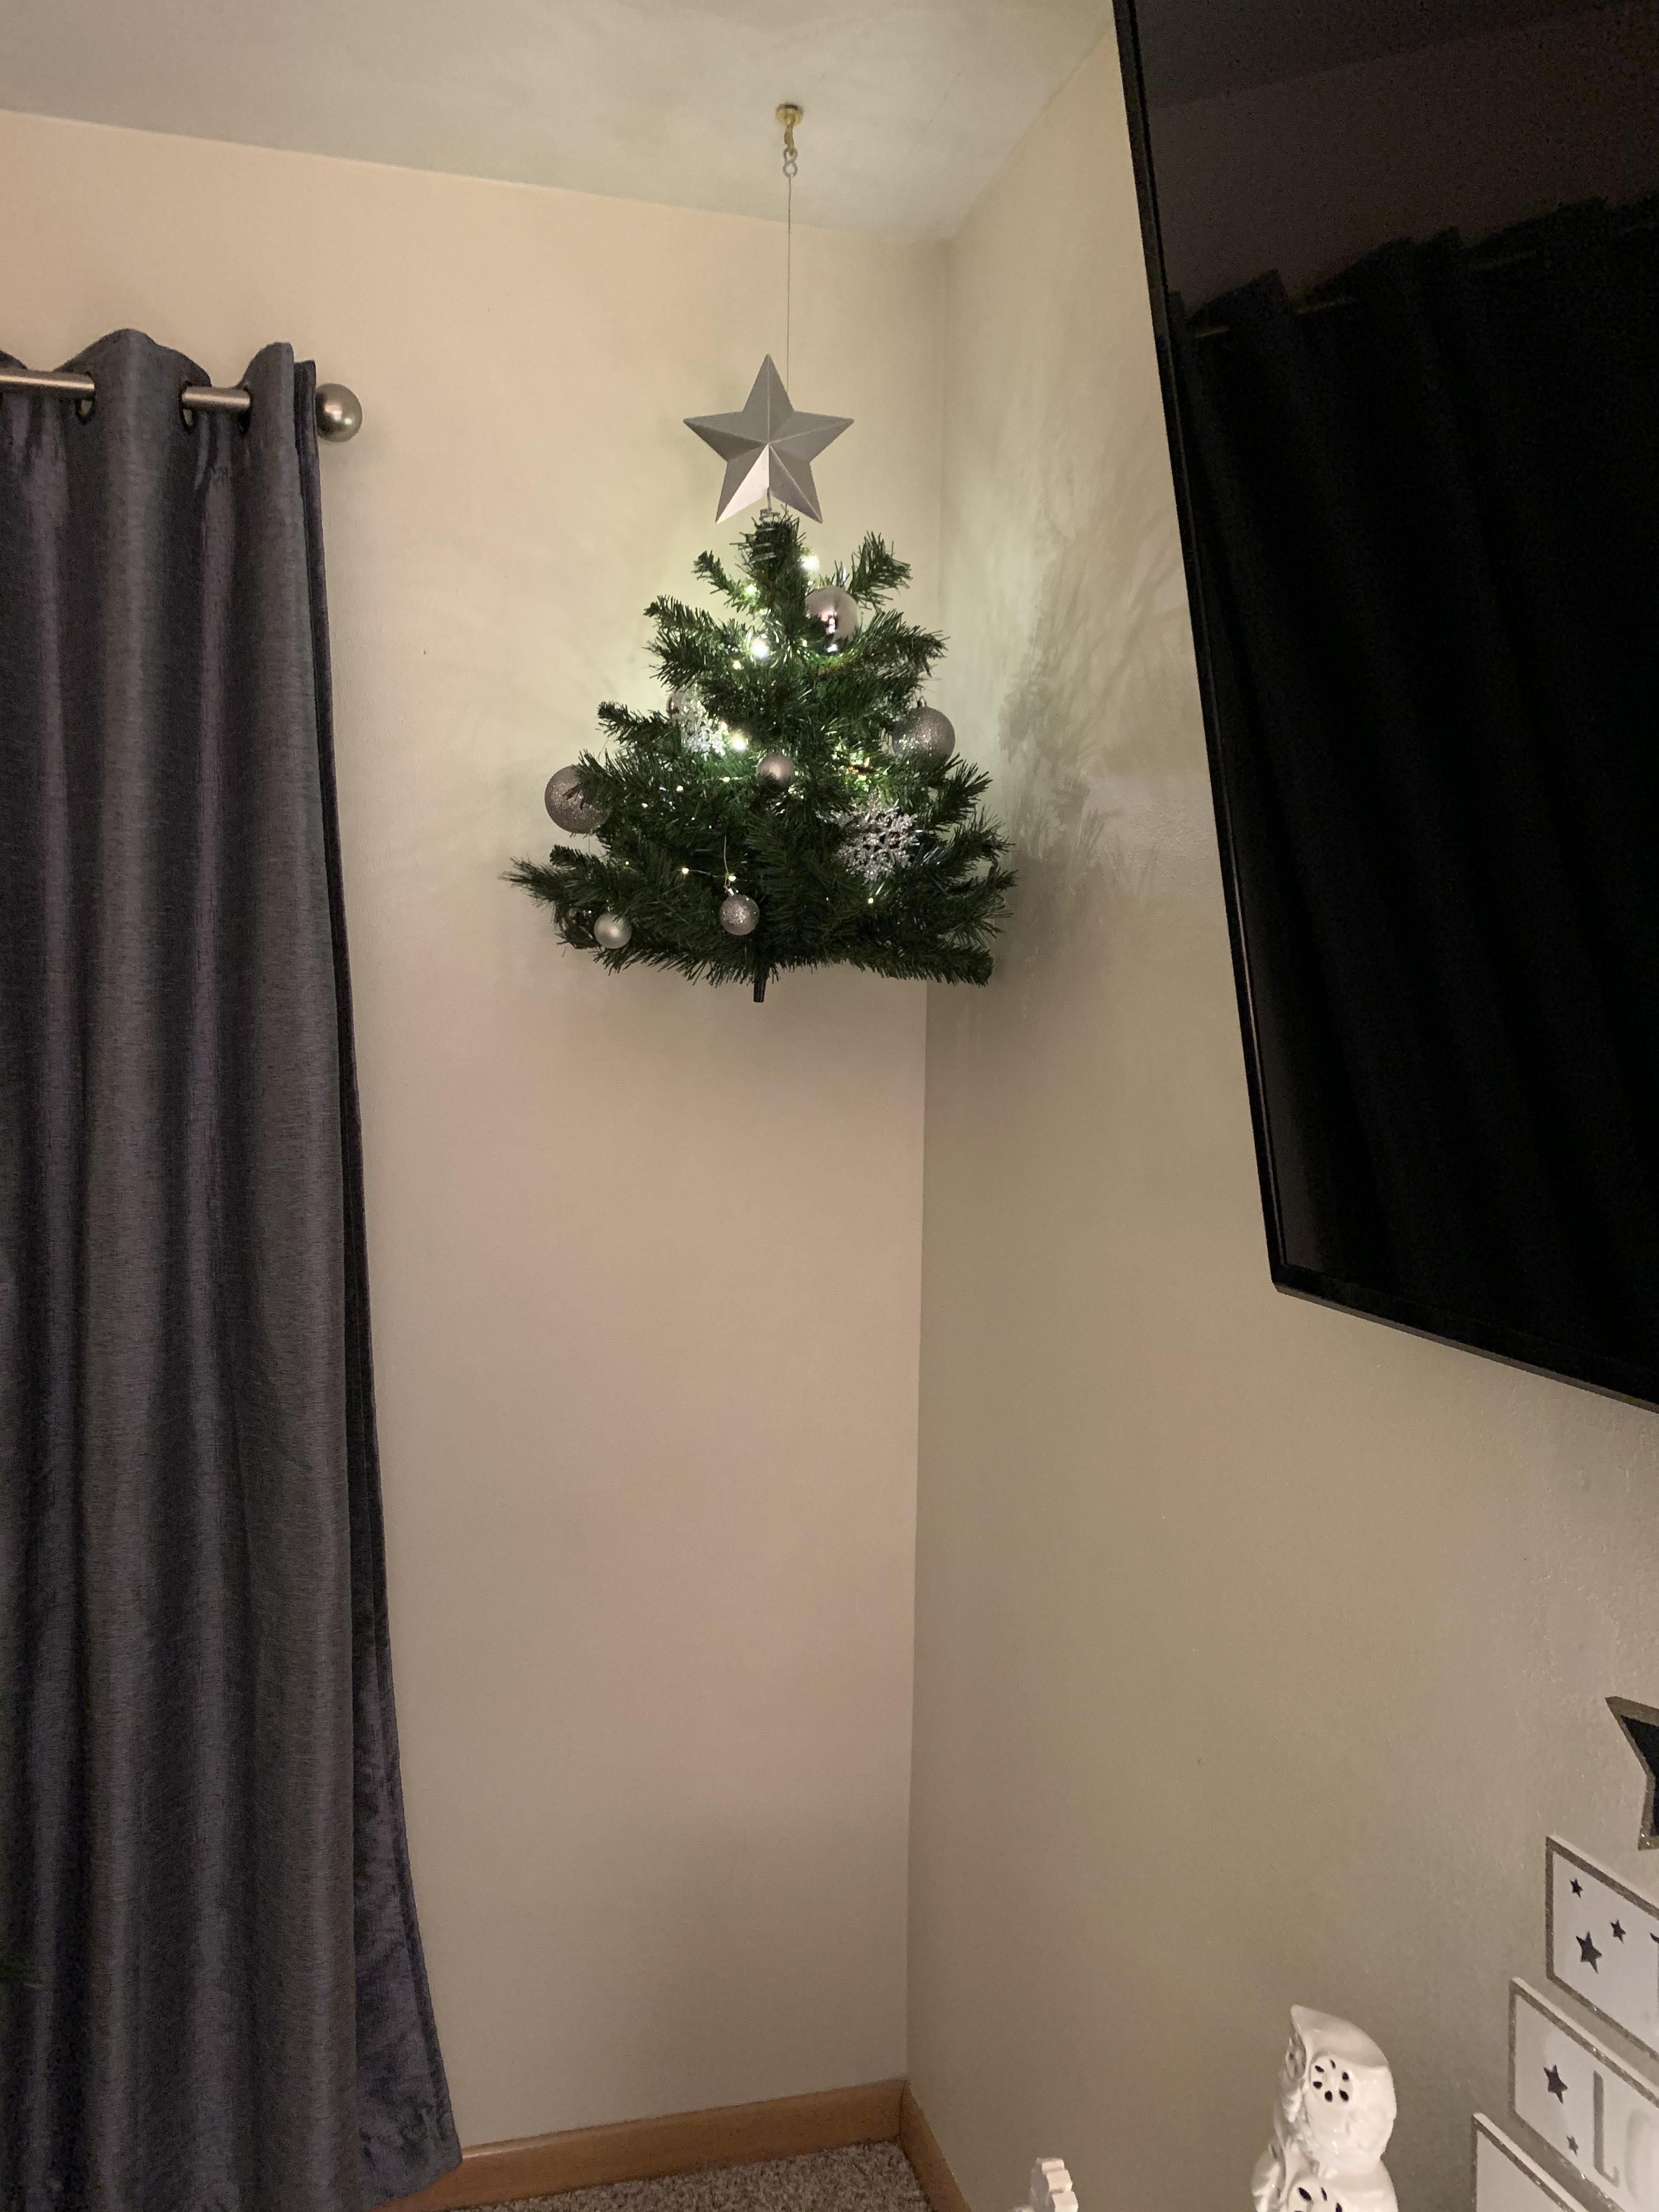 Our cats wouldn’t stop climbing the tree, so my wife had a great idea...checkmate Buttholes.